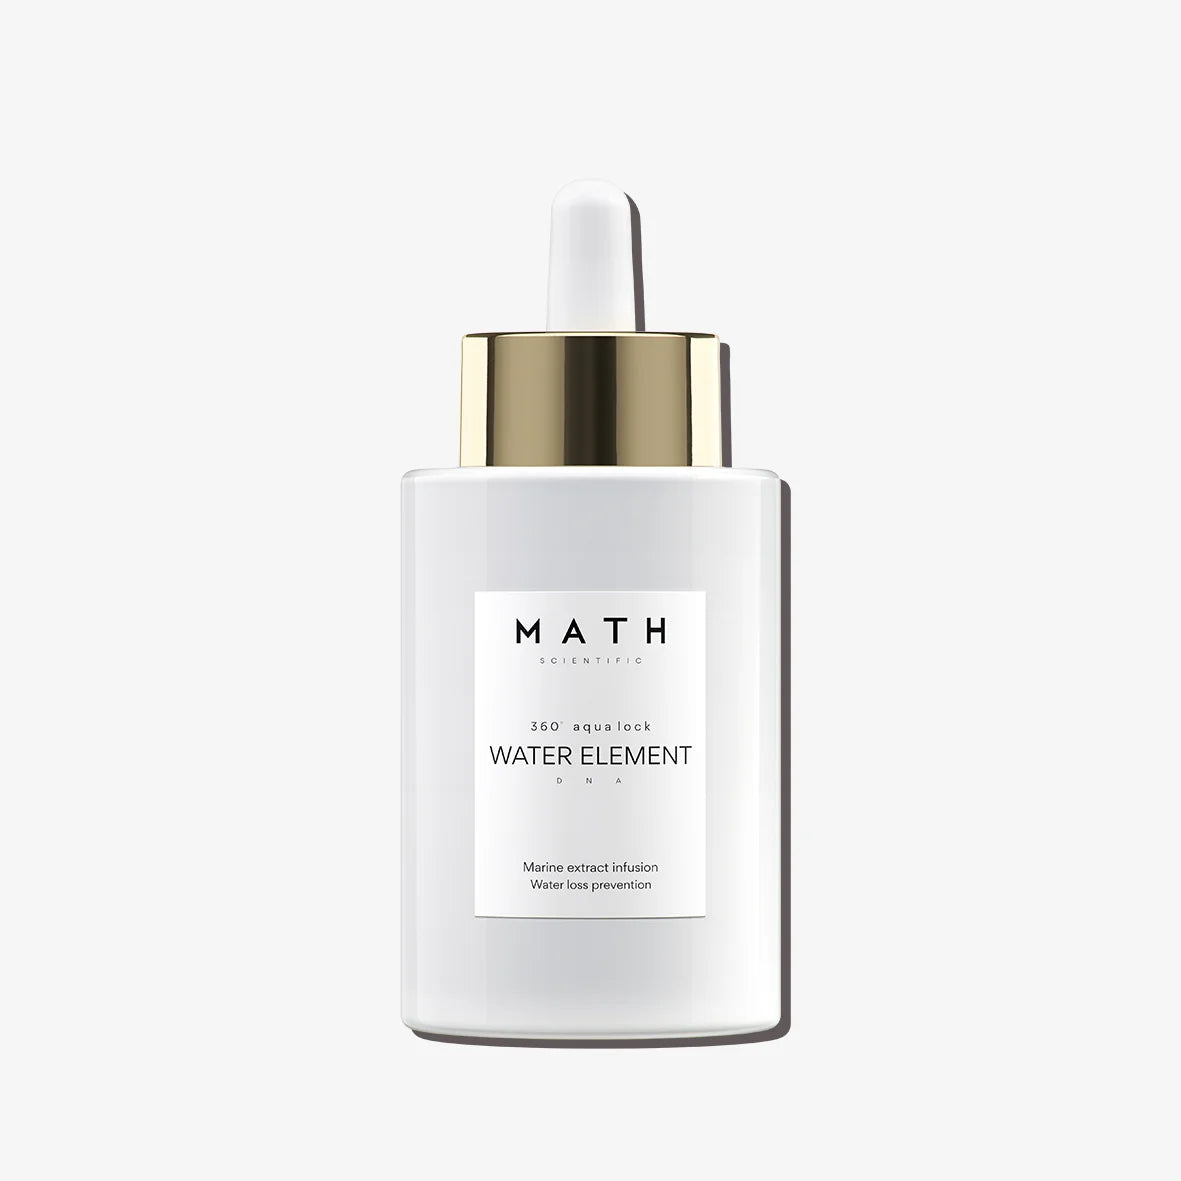 Hydrating and firming serum with seaweed extract "Water element"